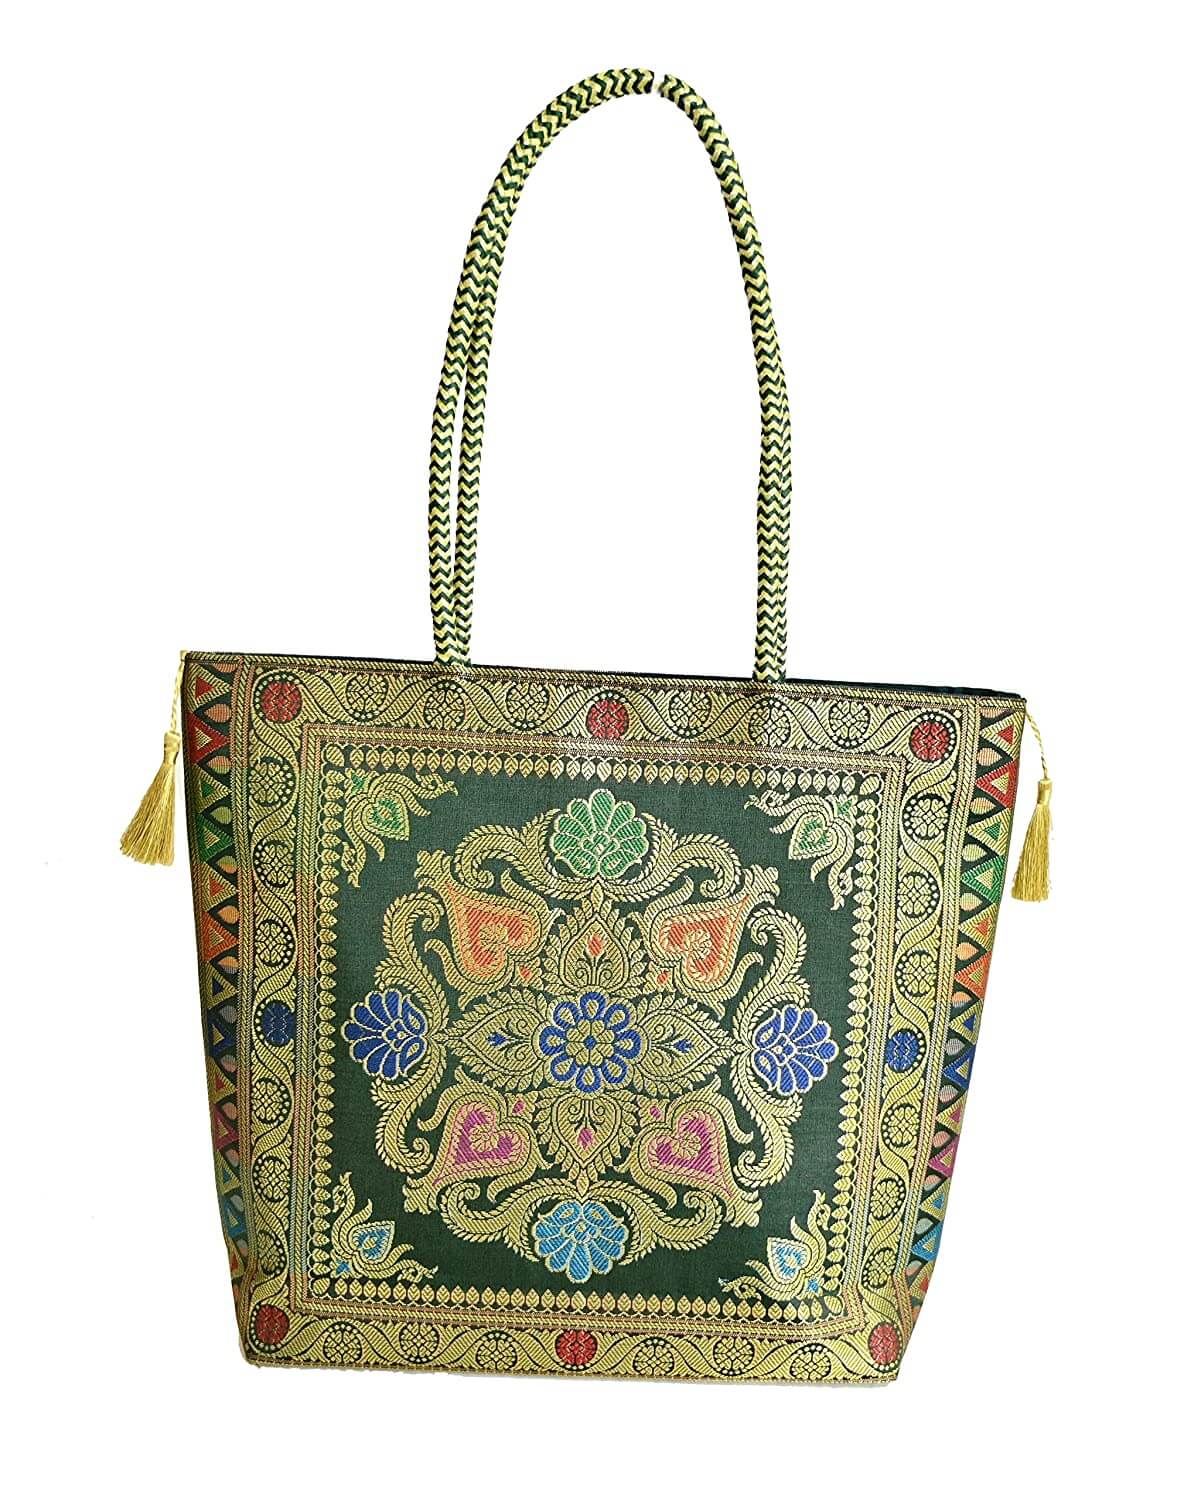 Embroidery Silk Handicraft Hand Bag, Shoulder, Tote Bag For Ladies (13 x 11.5 x 7.5 Inches, Rangoli, Dark Green (Kai Color)) Mangal Fashions | Indian Home Decor and Craft